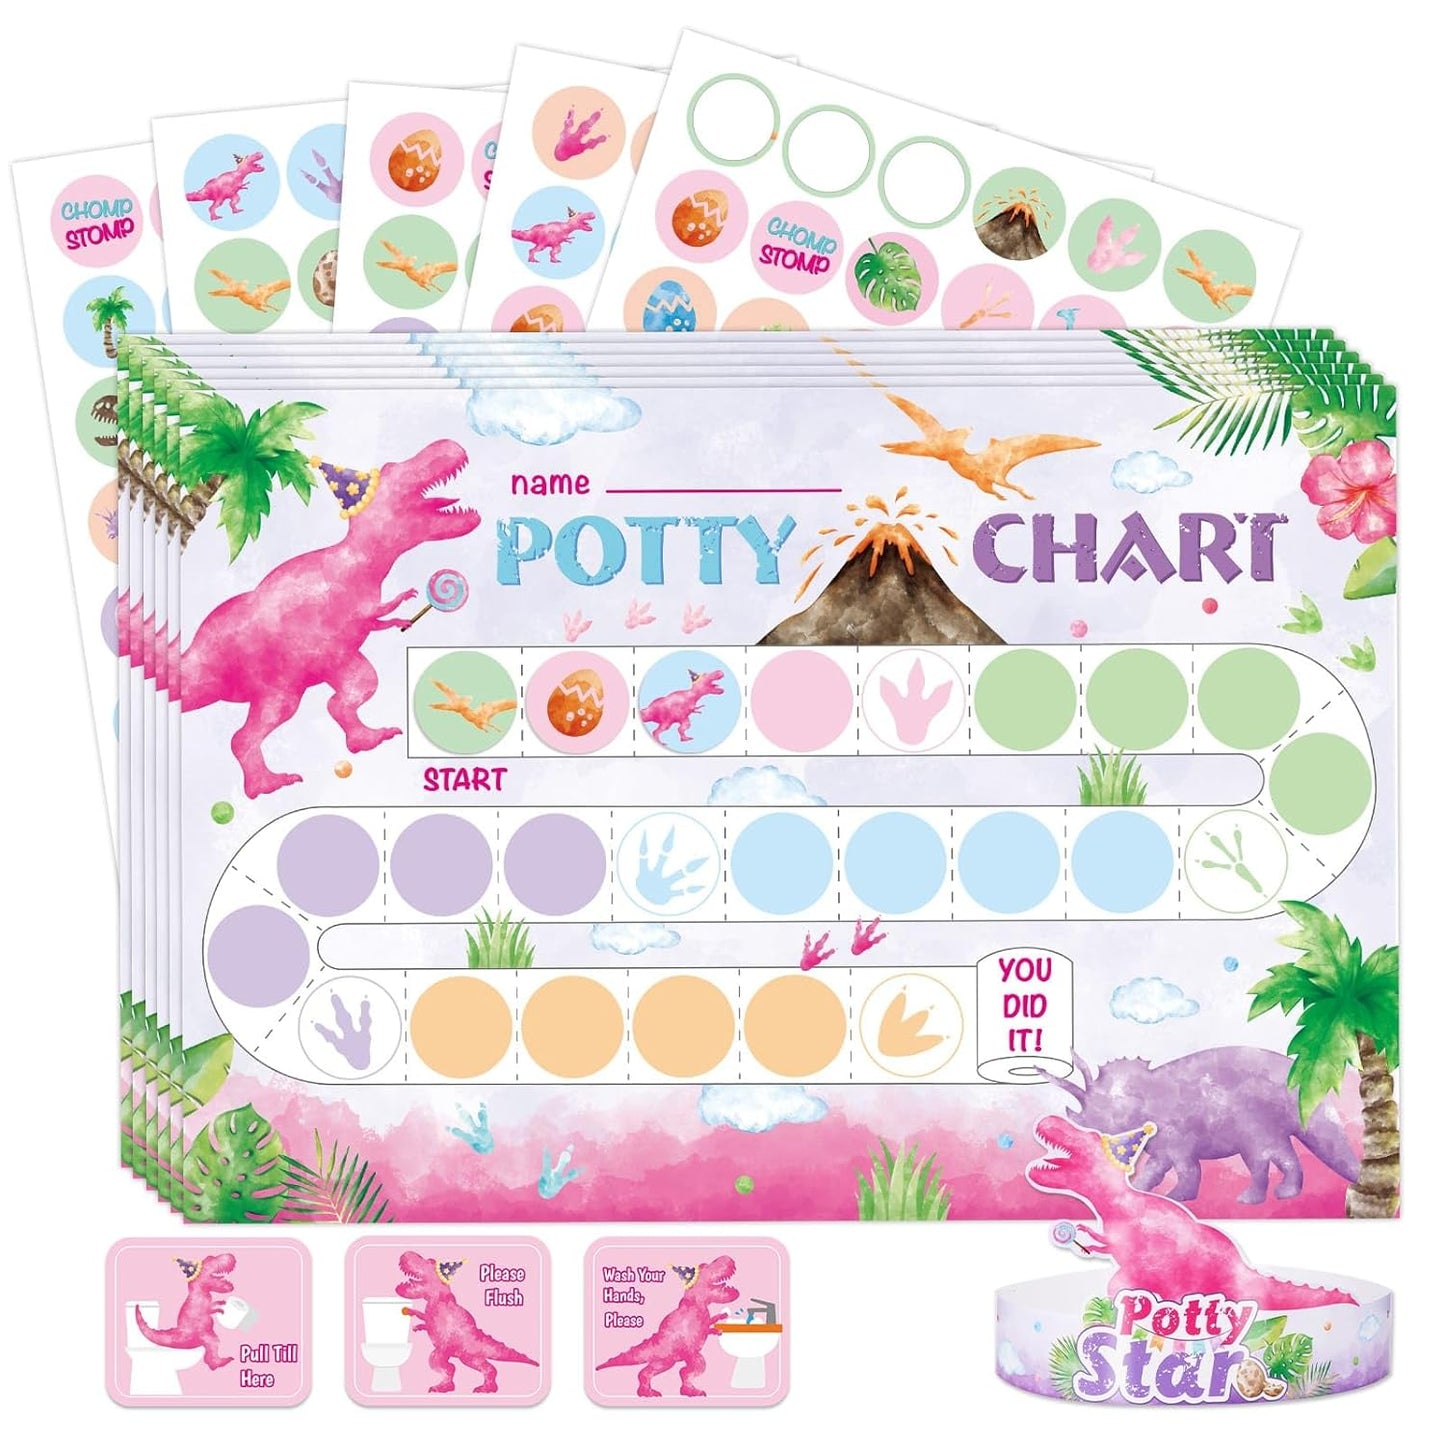 Potty Training Chart - Dinosaur Toilet Training Reward Chart with 270 Potty Training Stickers Crown Pink Sticker Chart for Boys Toddler Kids Potty Training for Ideal Gift Birthday